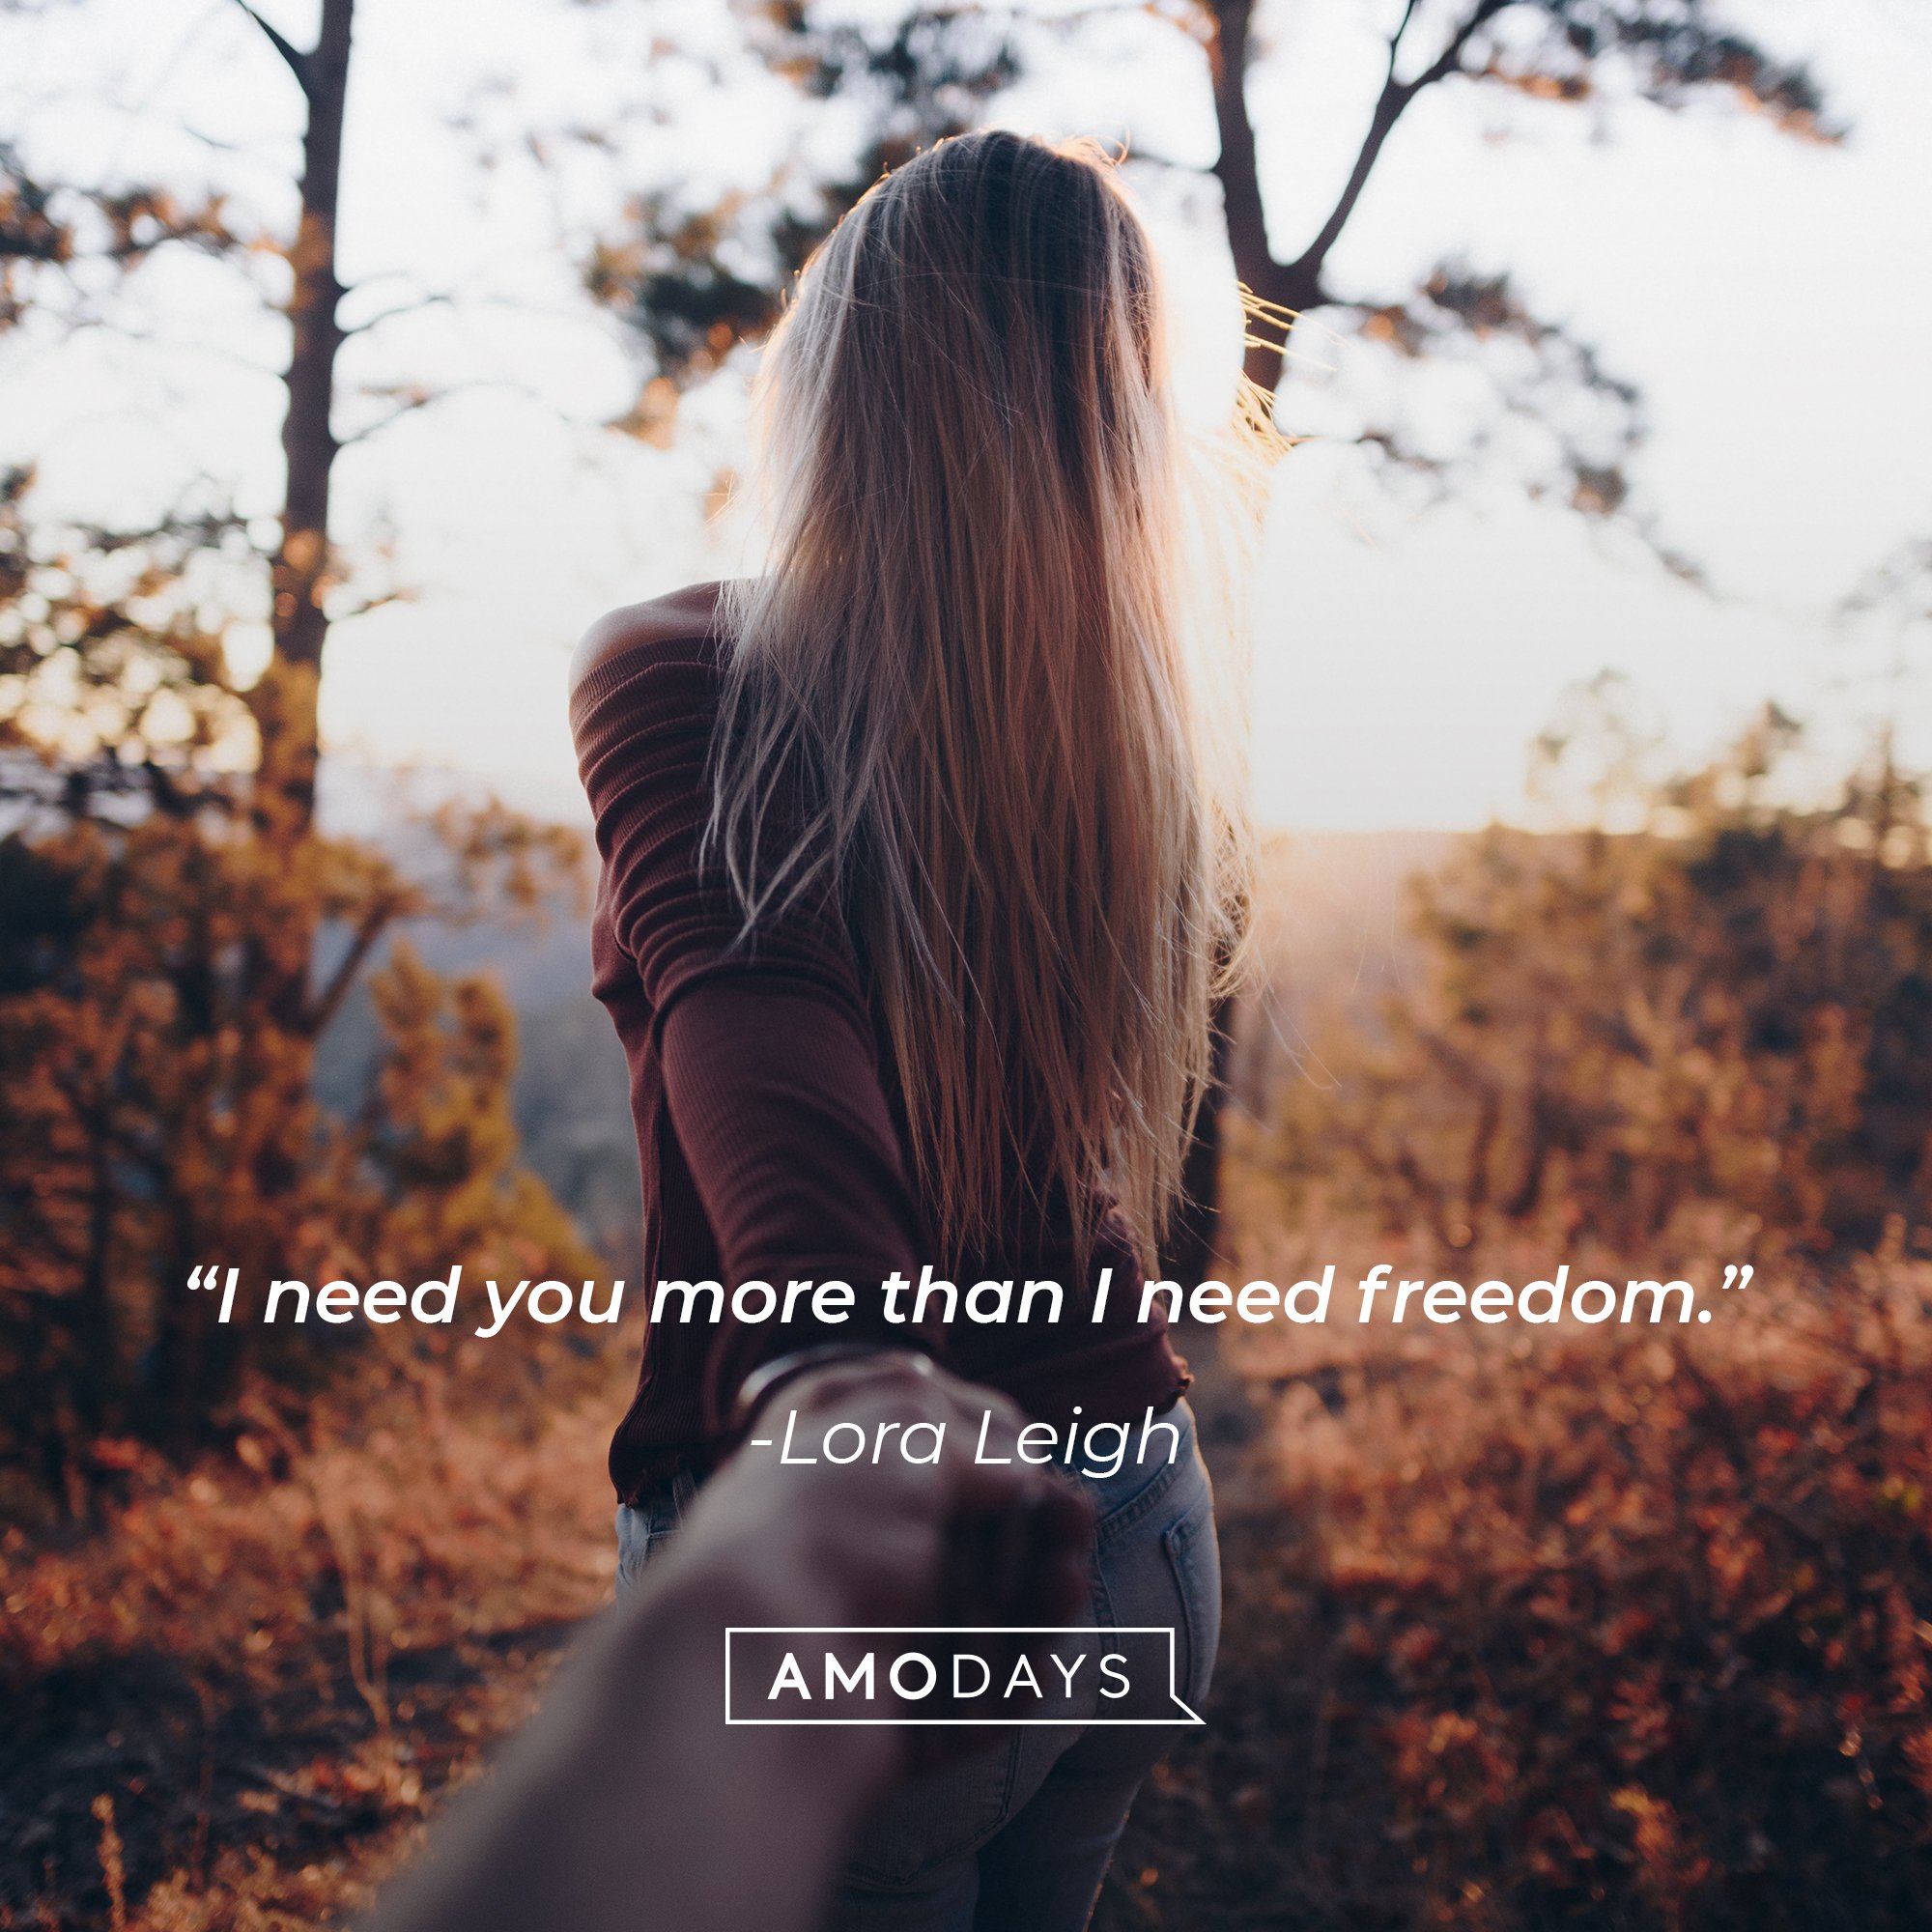  Lora Leigh’s quote: "I need you more than I need freedom." | Image: AmoDays